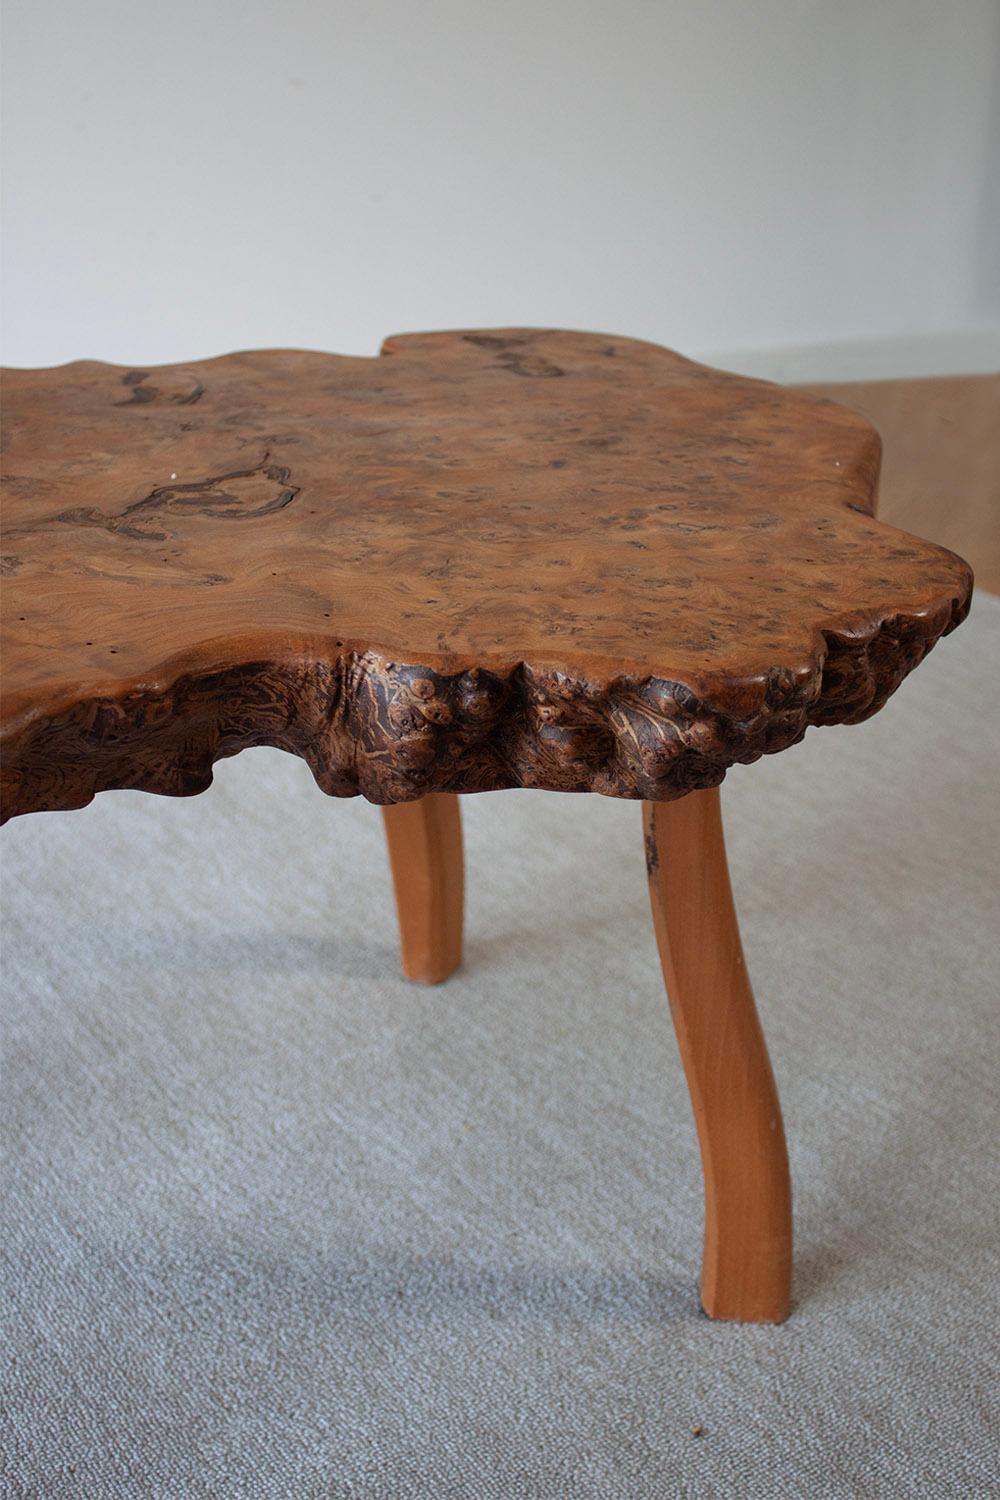 20th Century Frechn hand made burl wood low table with 4 burl wood stools